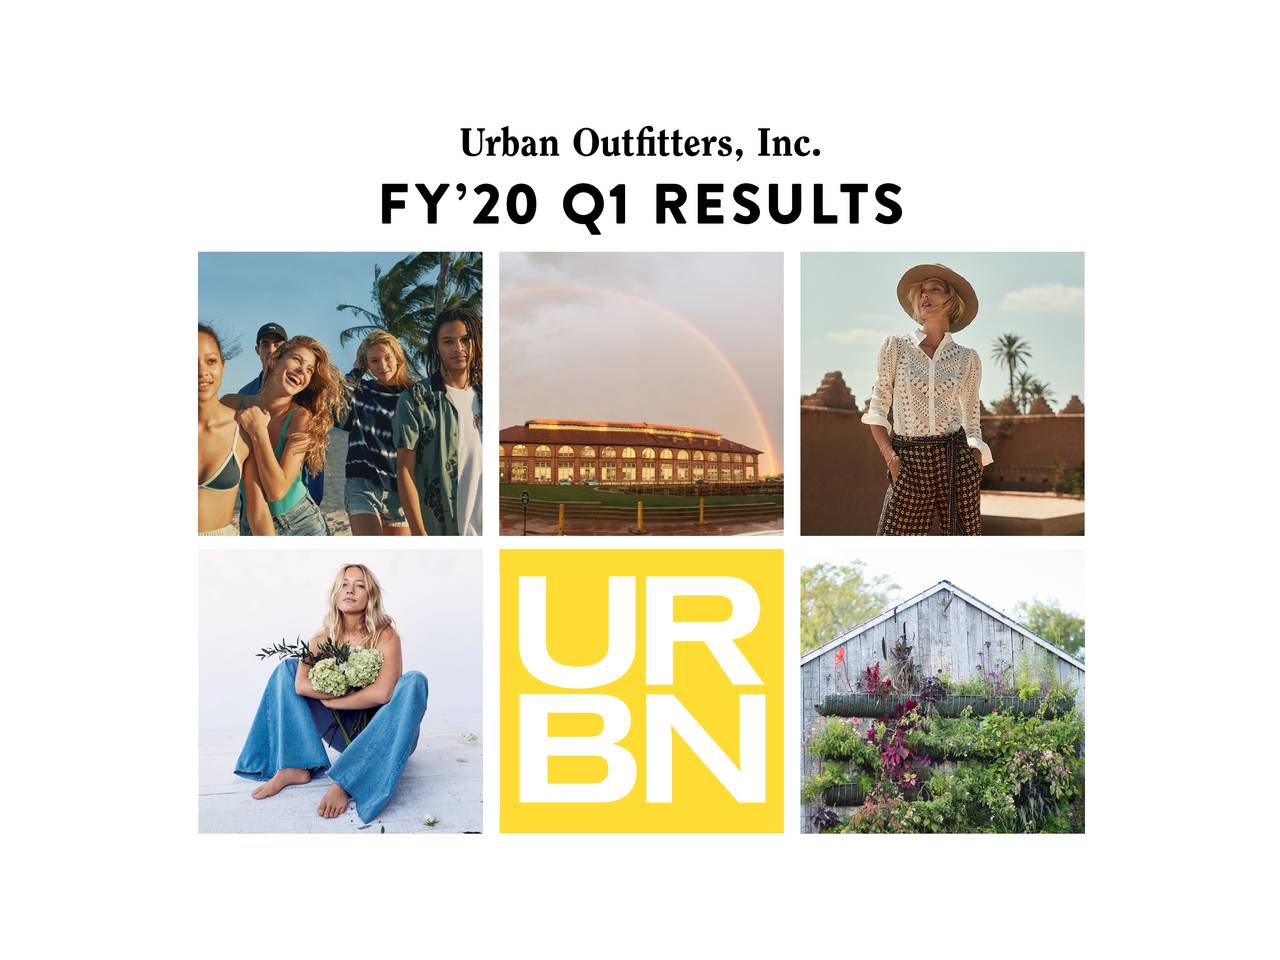 FY’ 20 Q1 RESULTS